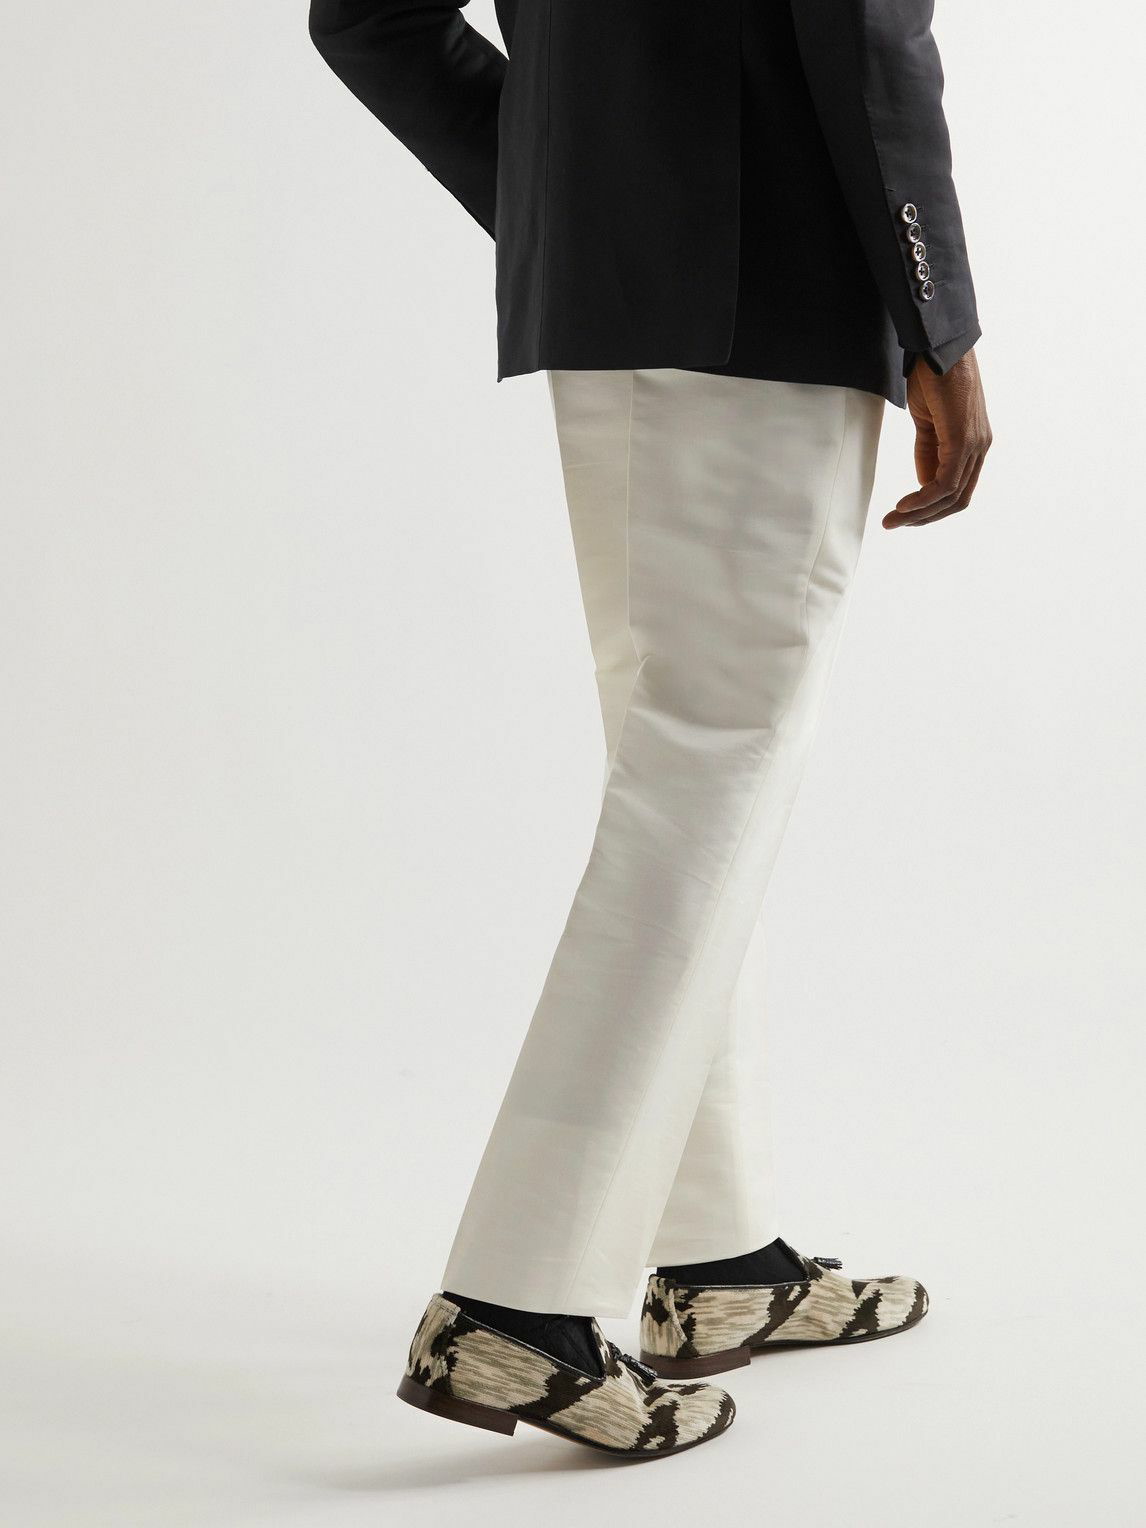 Shelton pleated pants in neutrals - Tom Ford